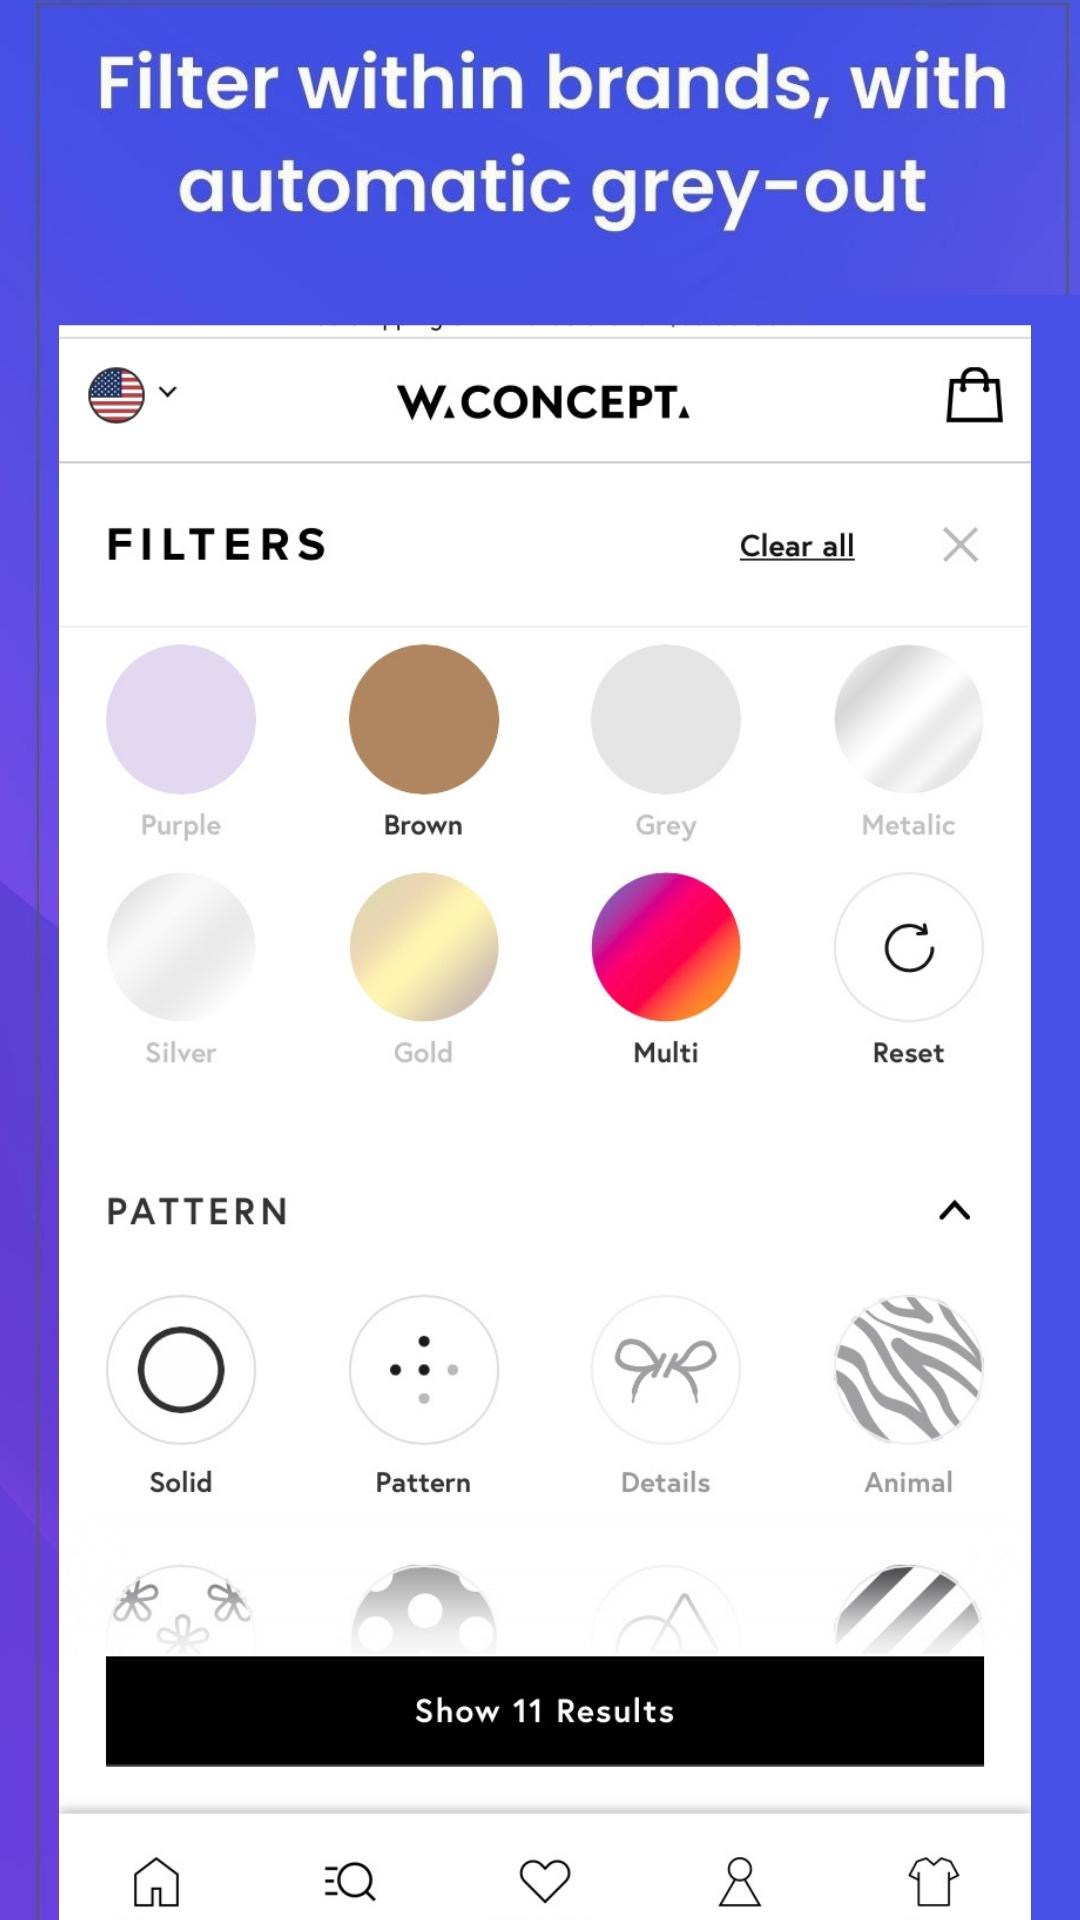 Filter with automatic brand grey out for YesPlz dynamic smart product filters